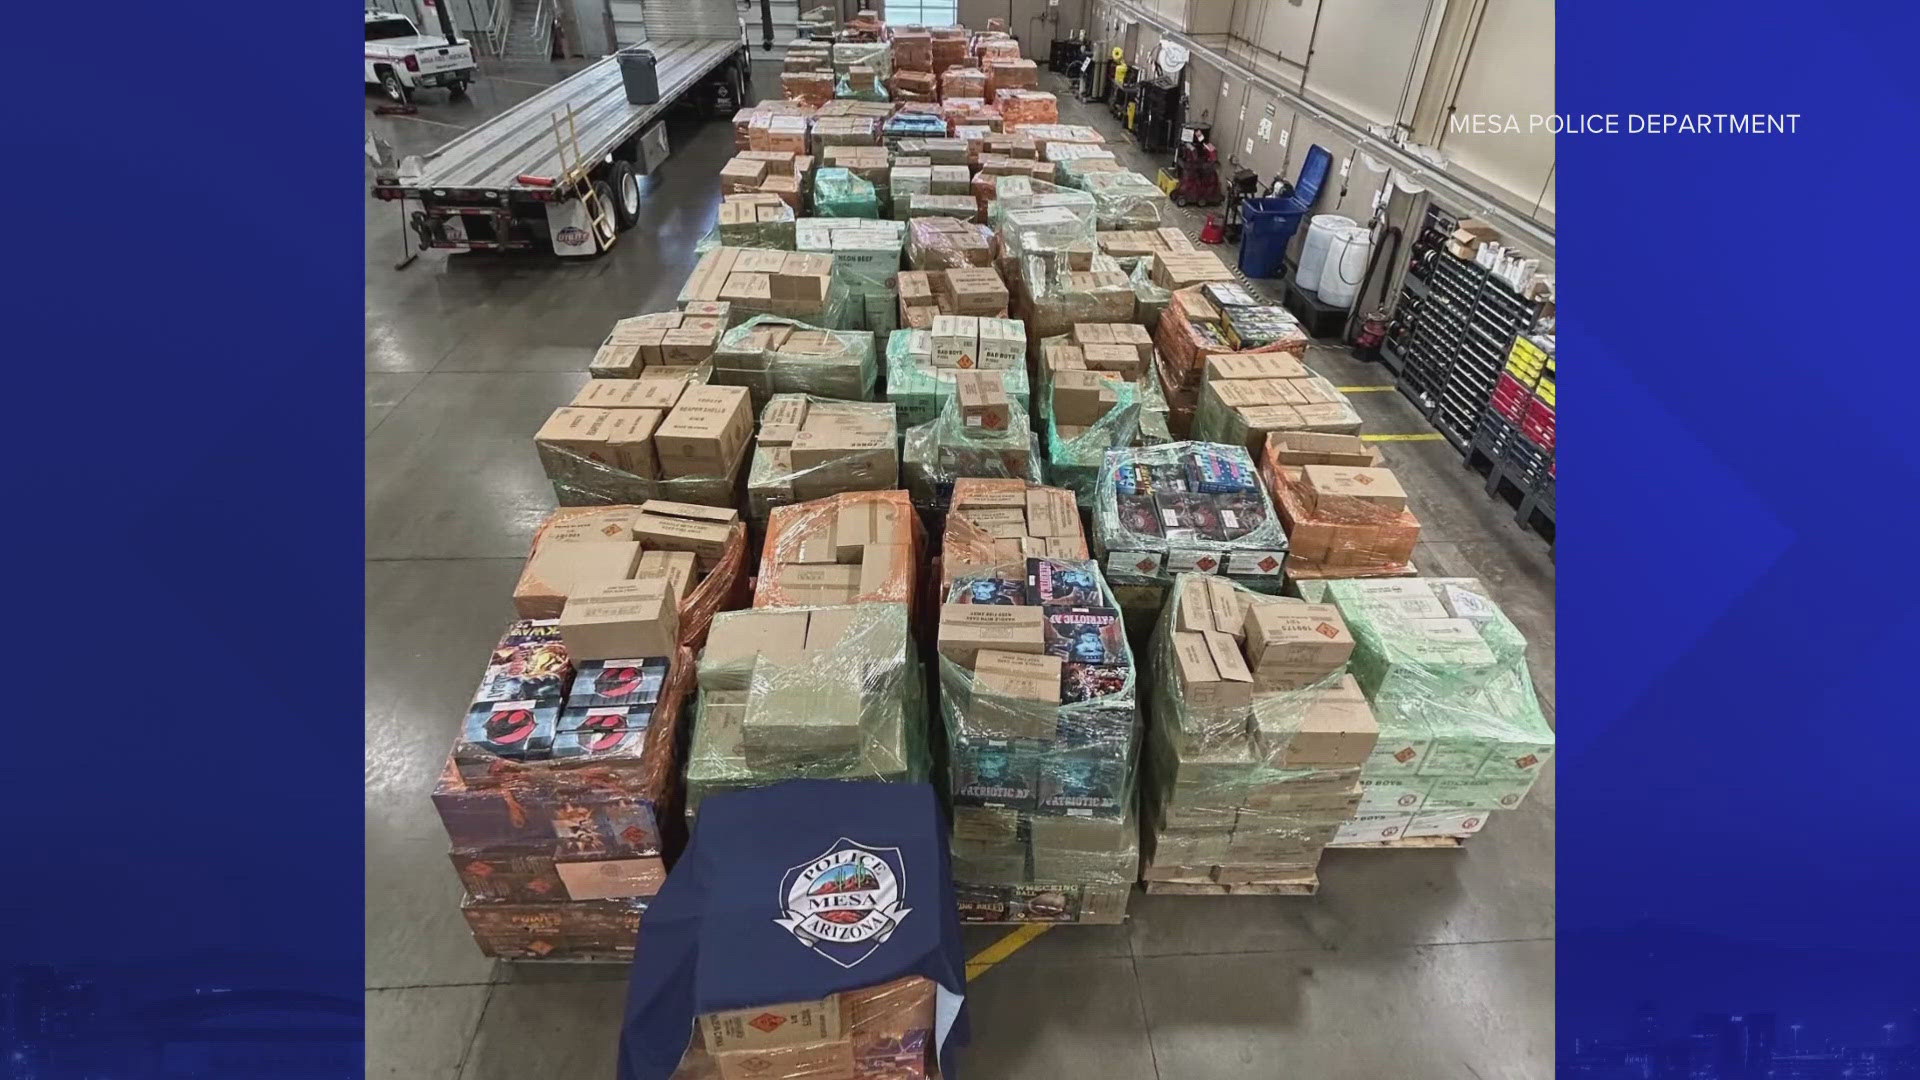 Mesa police have seized more than a million dollars worth of illegal fireworks.